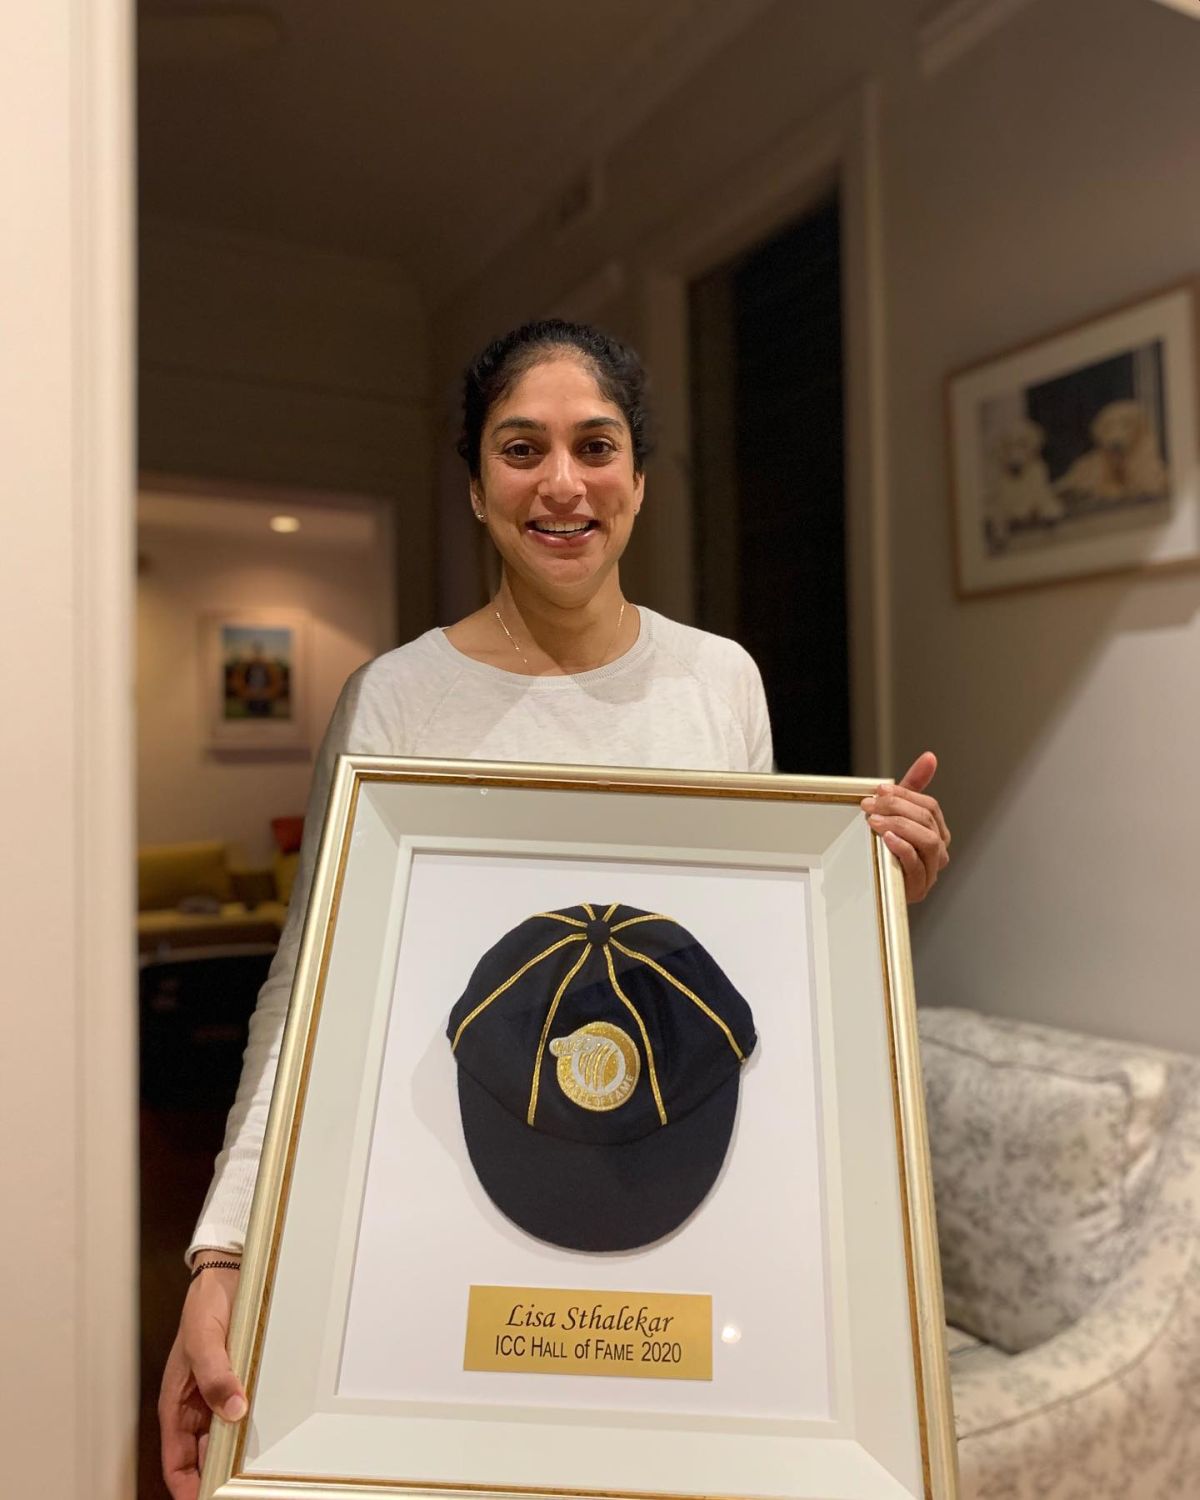 Lisa Sthalekar was inducted into the ICC Cricket Hall of Fame in August 2020. 